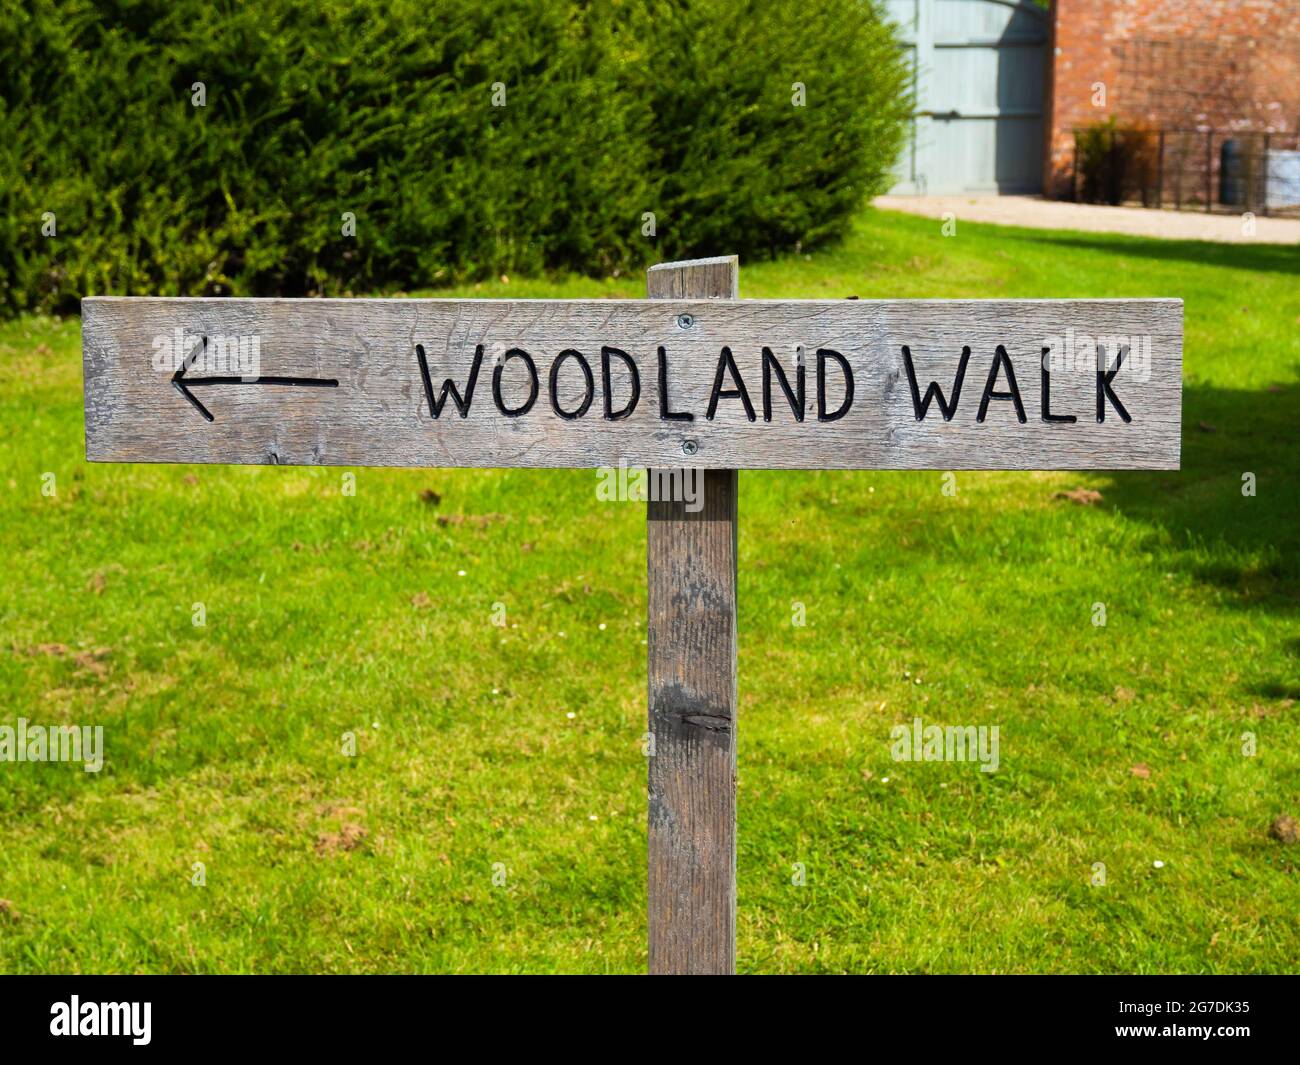 Signpost to the Woodland Walk at the Wynyard Hall near the edible garden Stock Photo